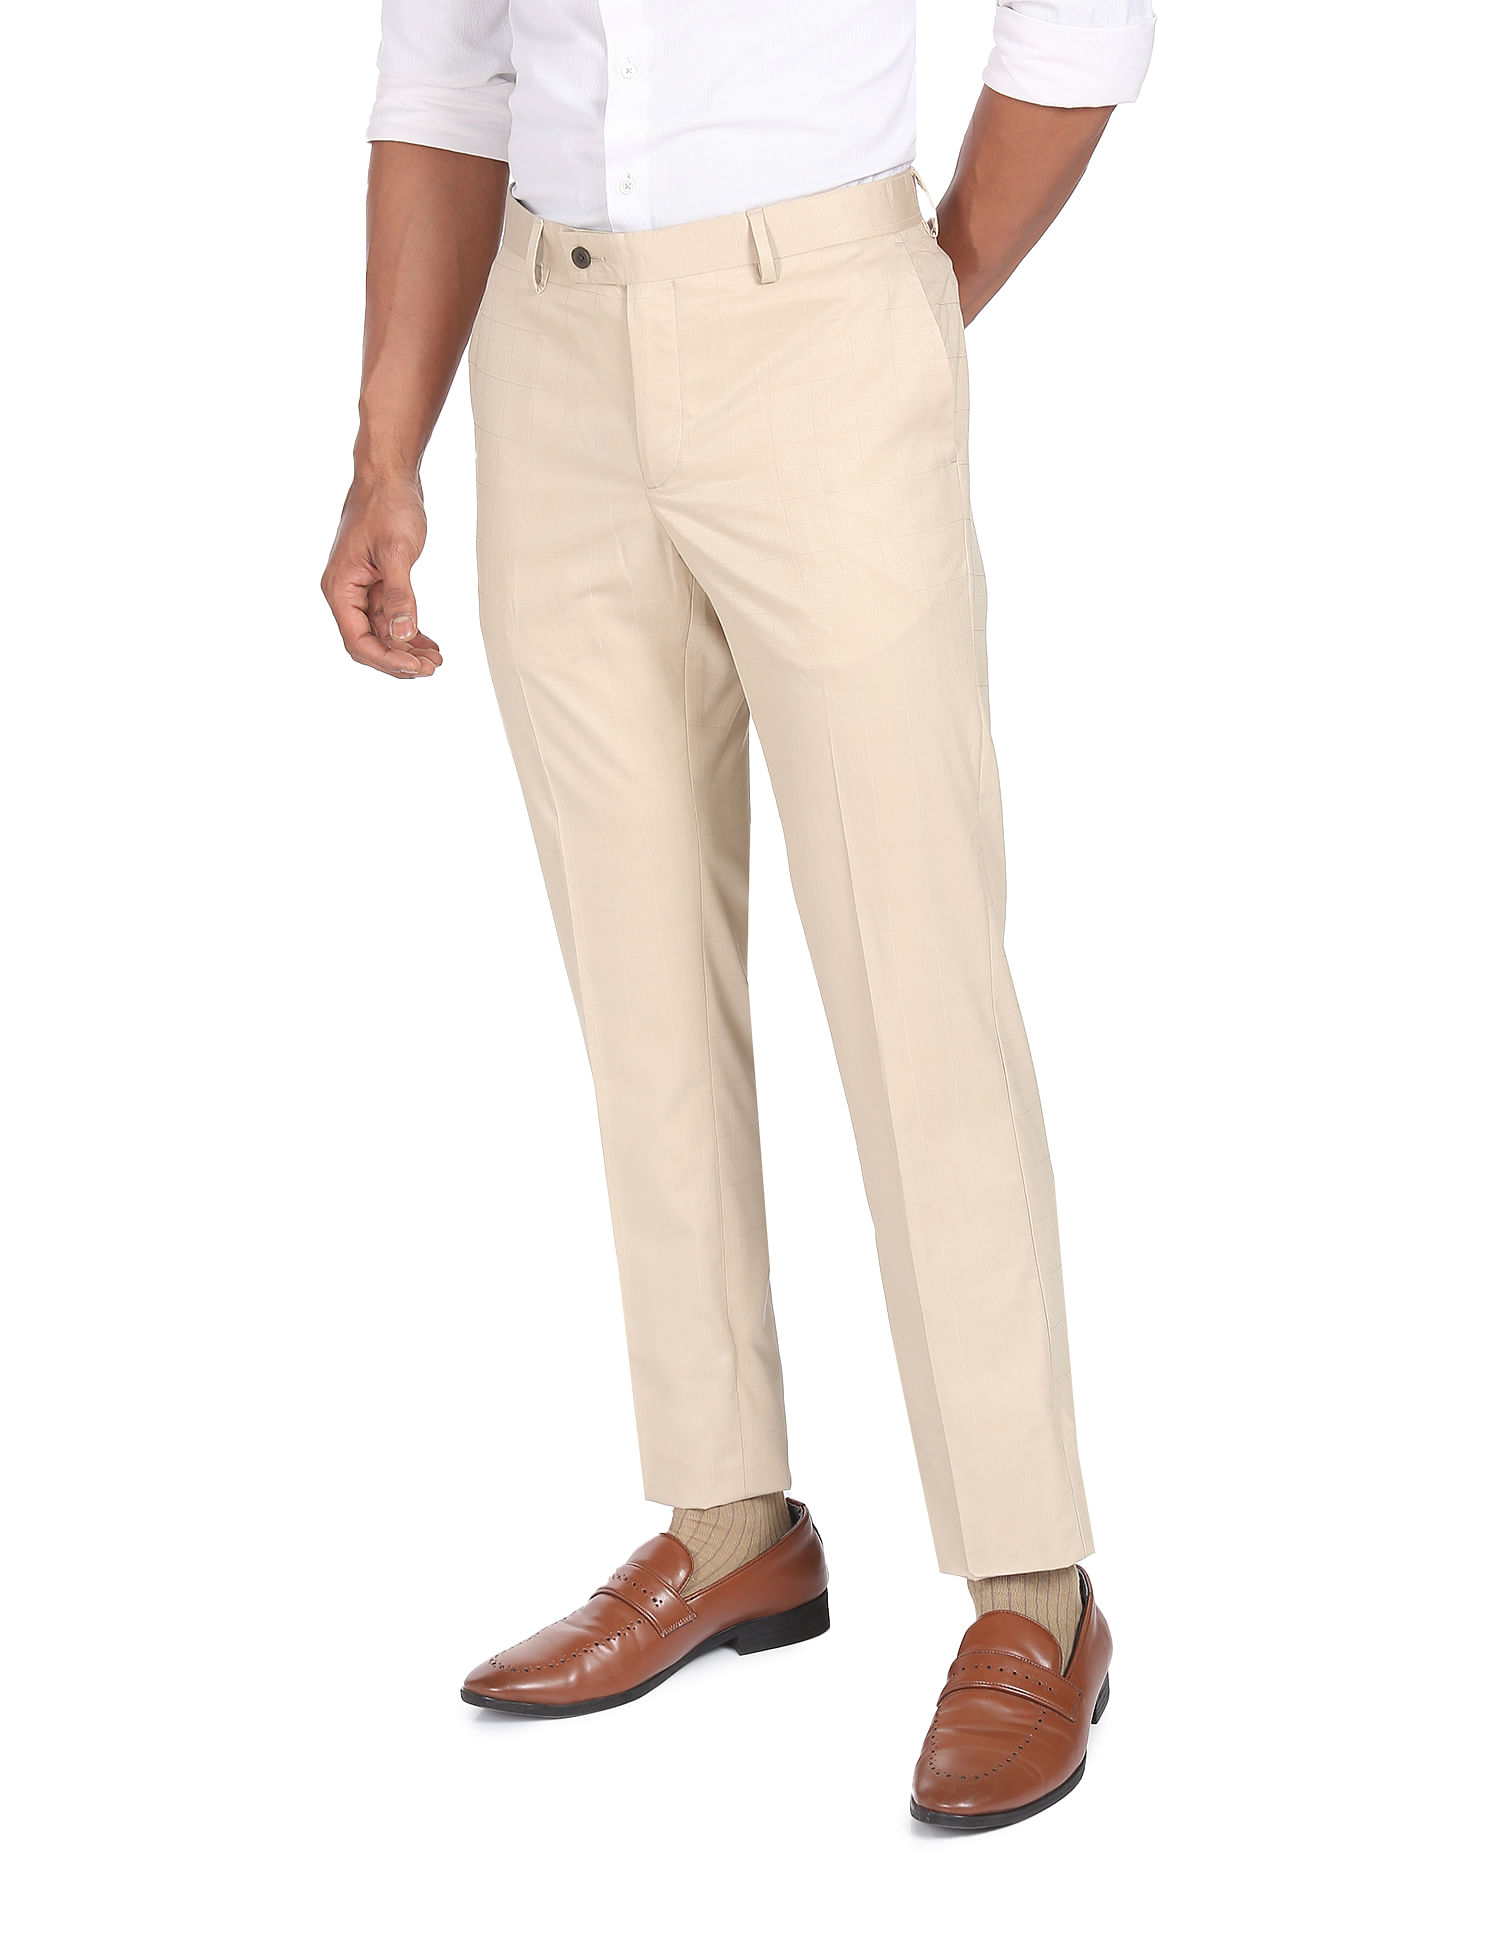 Mens Trousers - Buy Mens Trousers Online Starting at Just ₹248 | Meesho